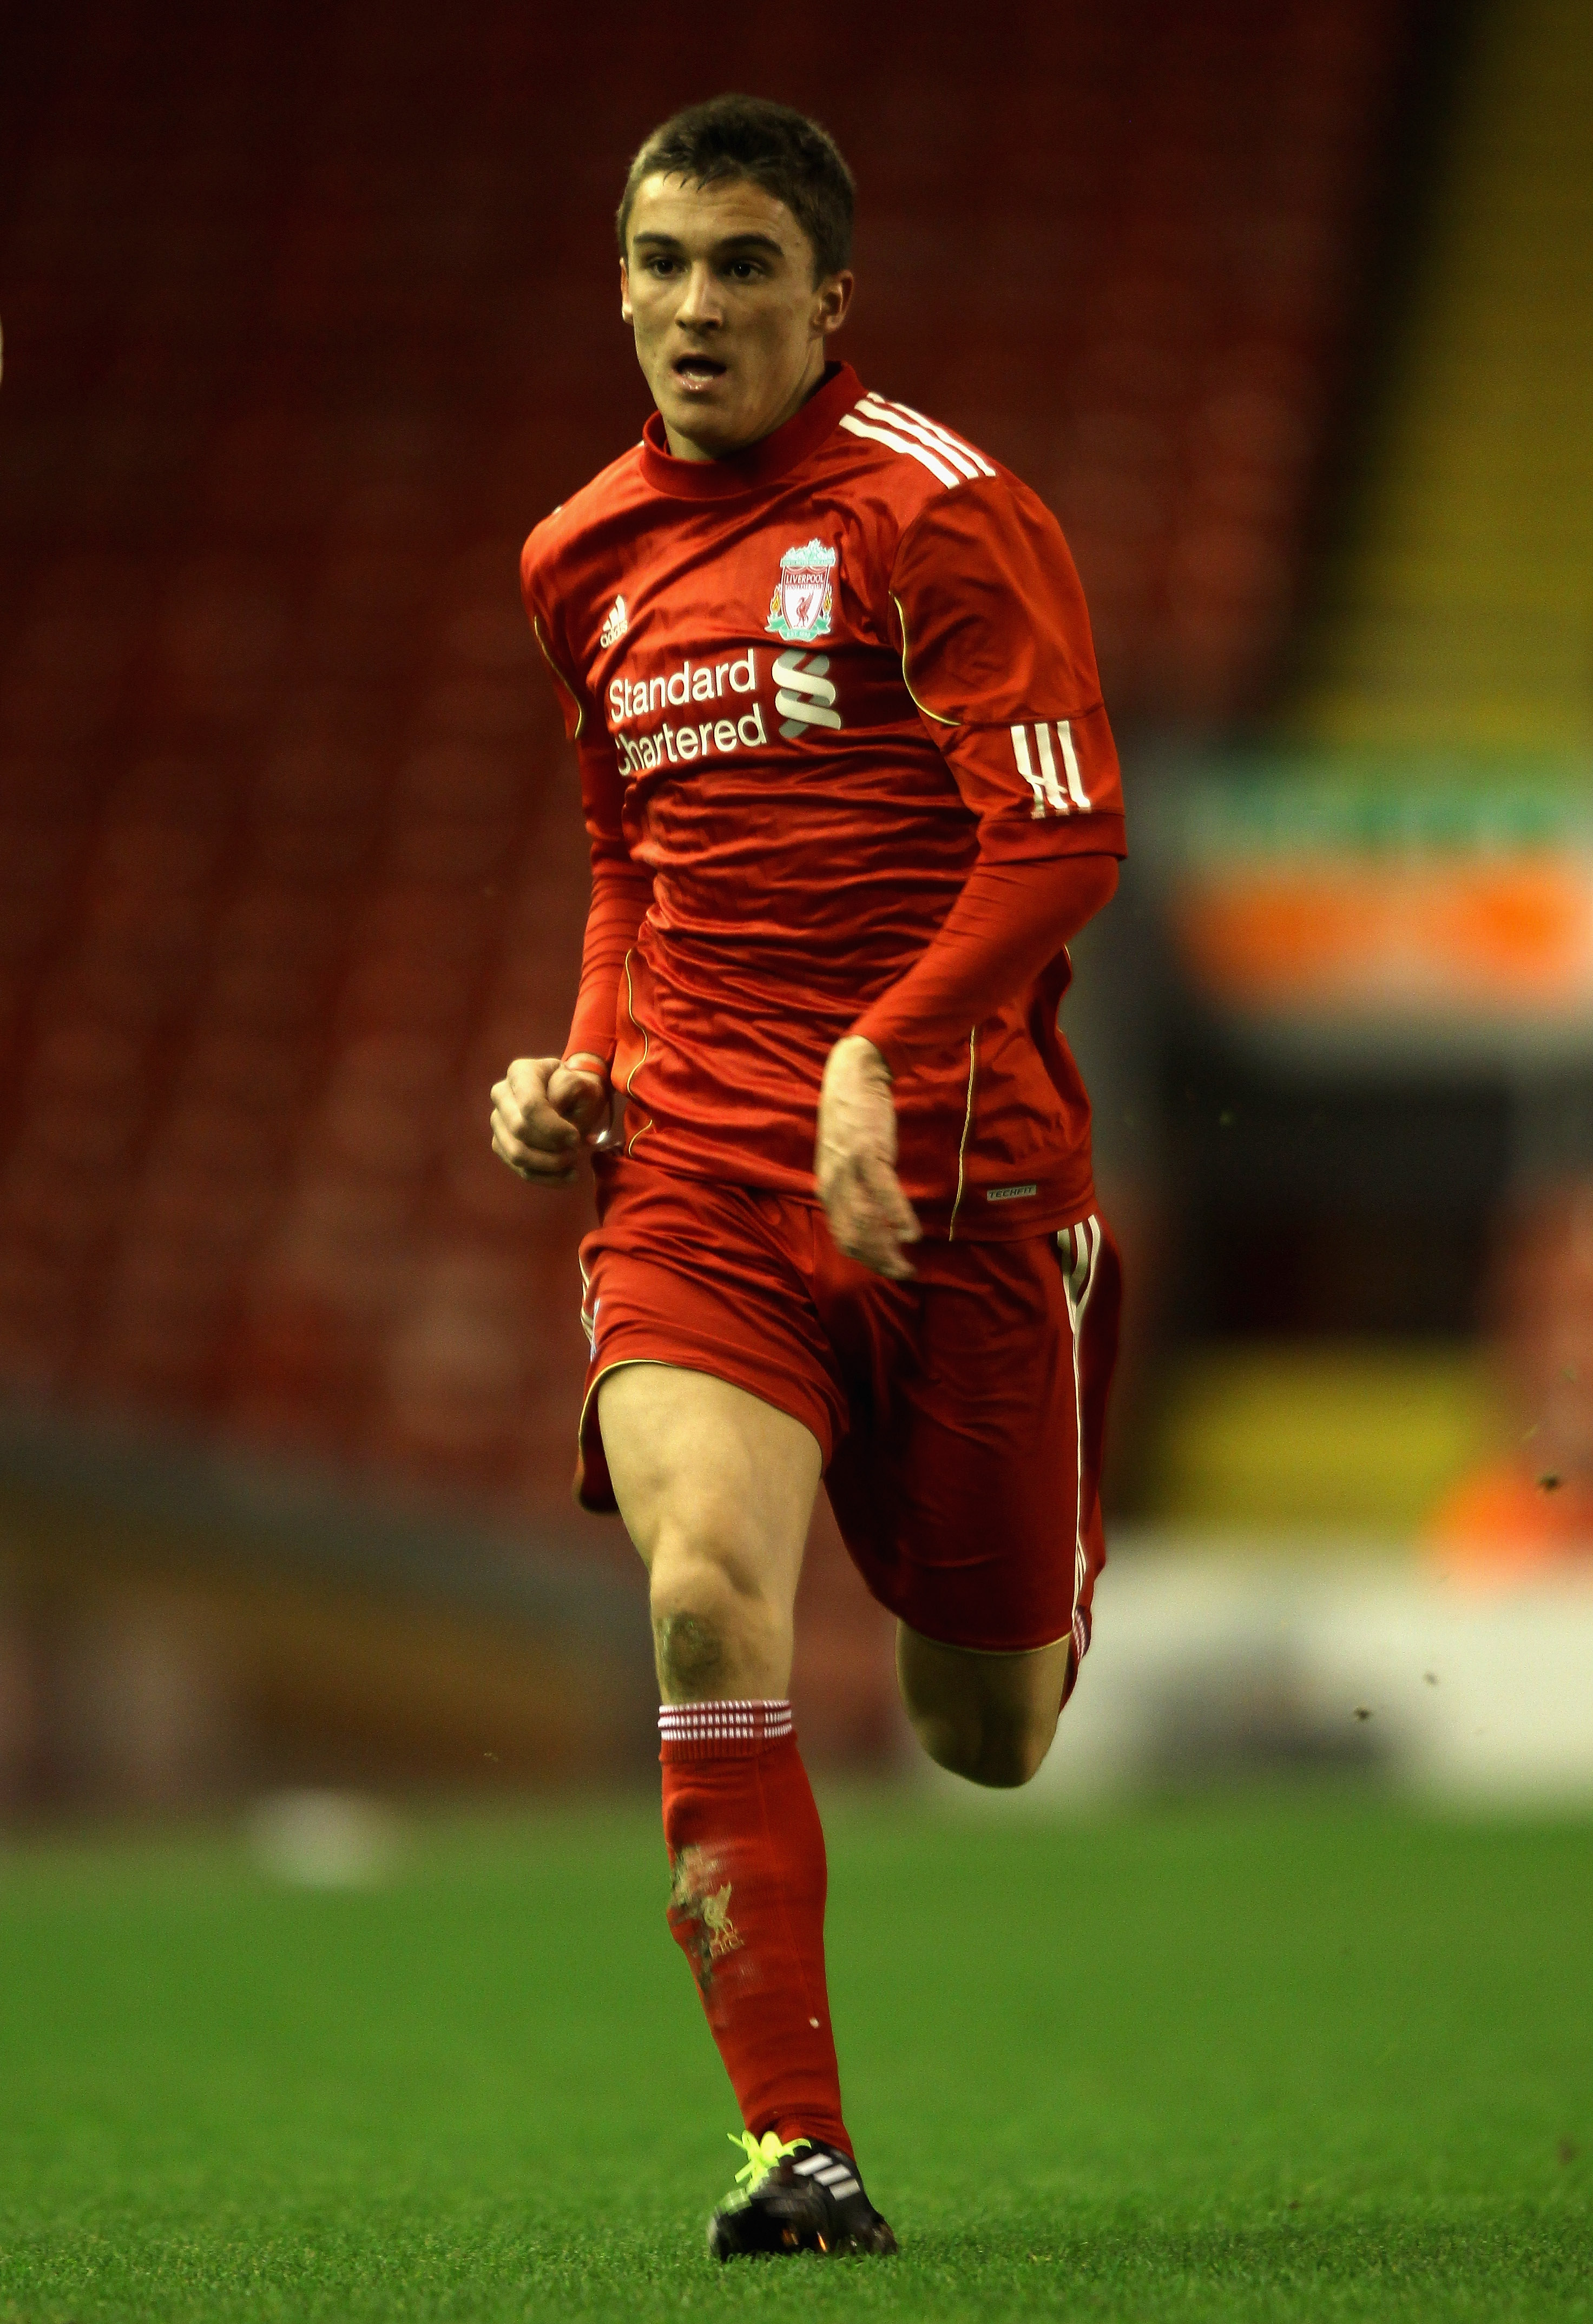 LIVERPOOL, ENGLAND - FEBRUARY 14: Adam Morgan of Liverpool in action during the FA Youth Cup match between Liverpool and Southend United at Anfield on February 14, 2011 in Liverpool, England.  (Photo by Clive Brunskill/Getty Images)